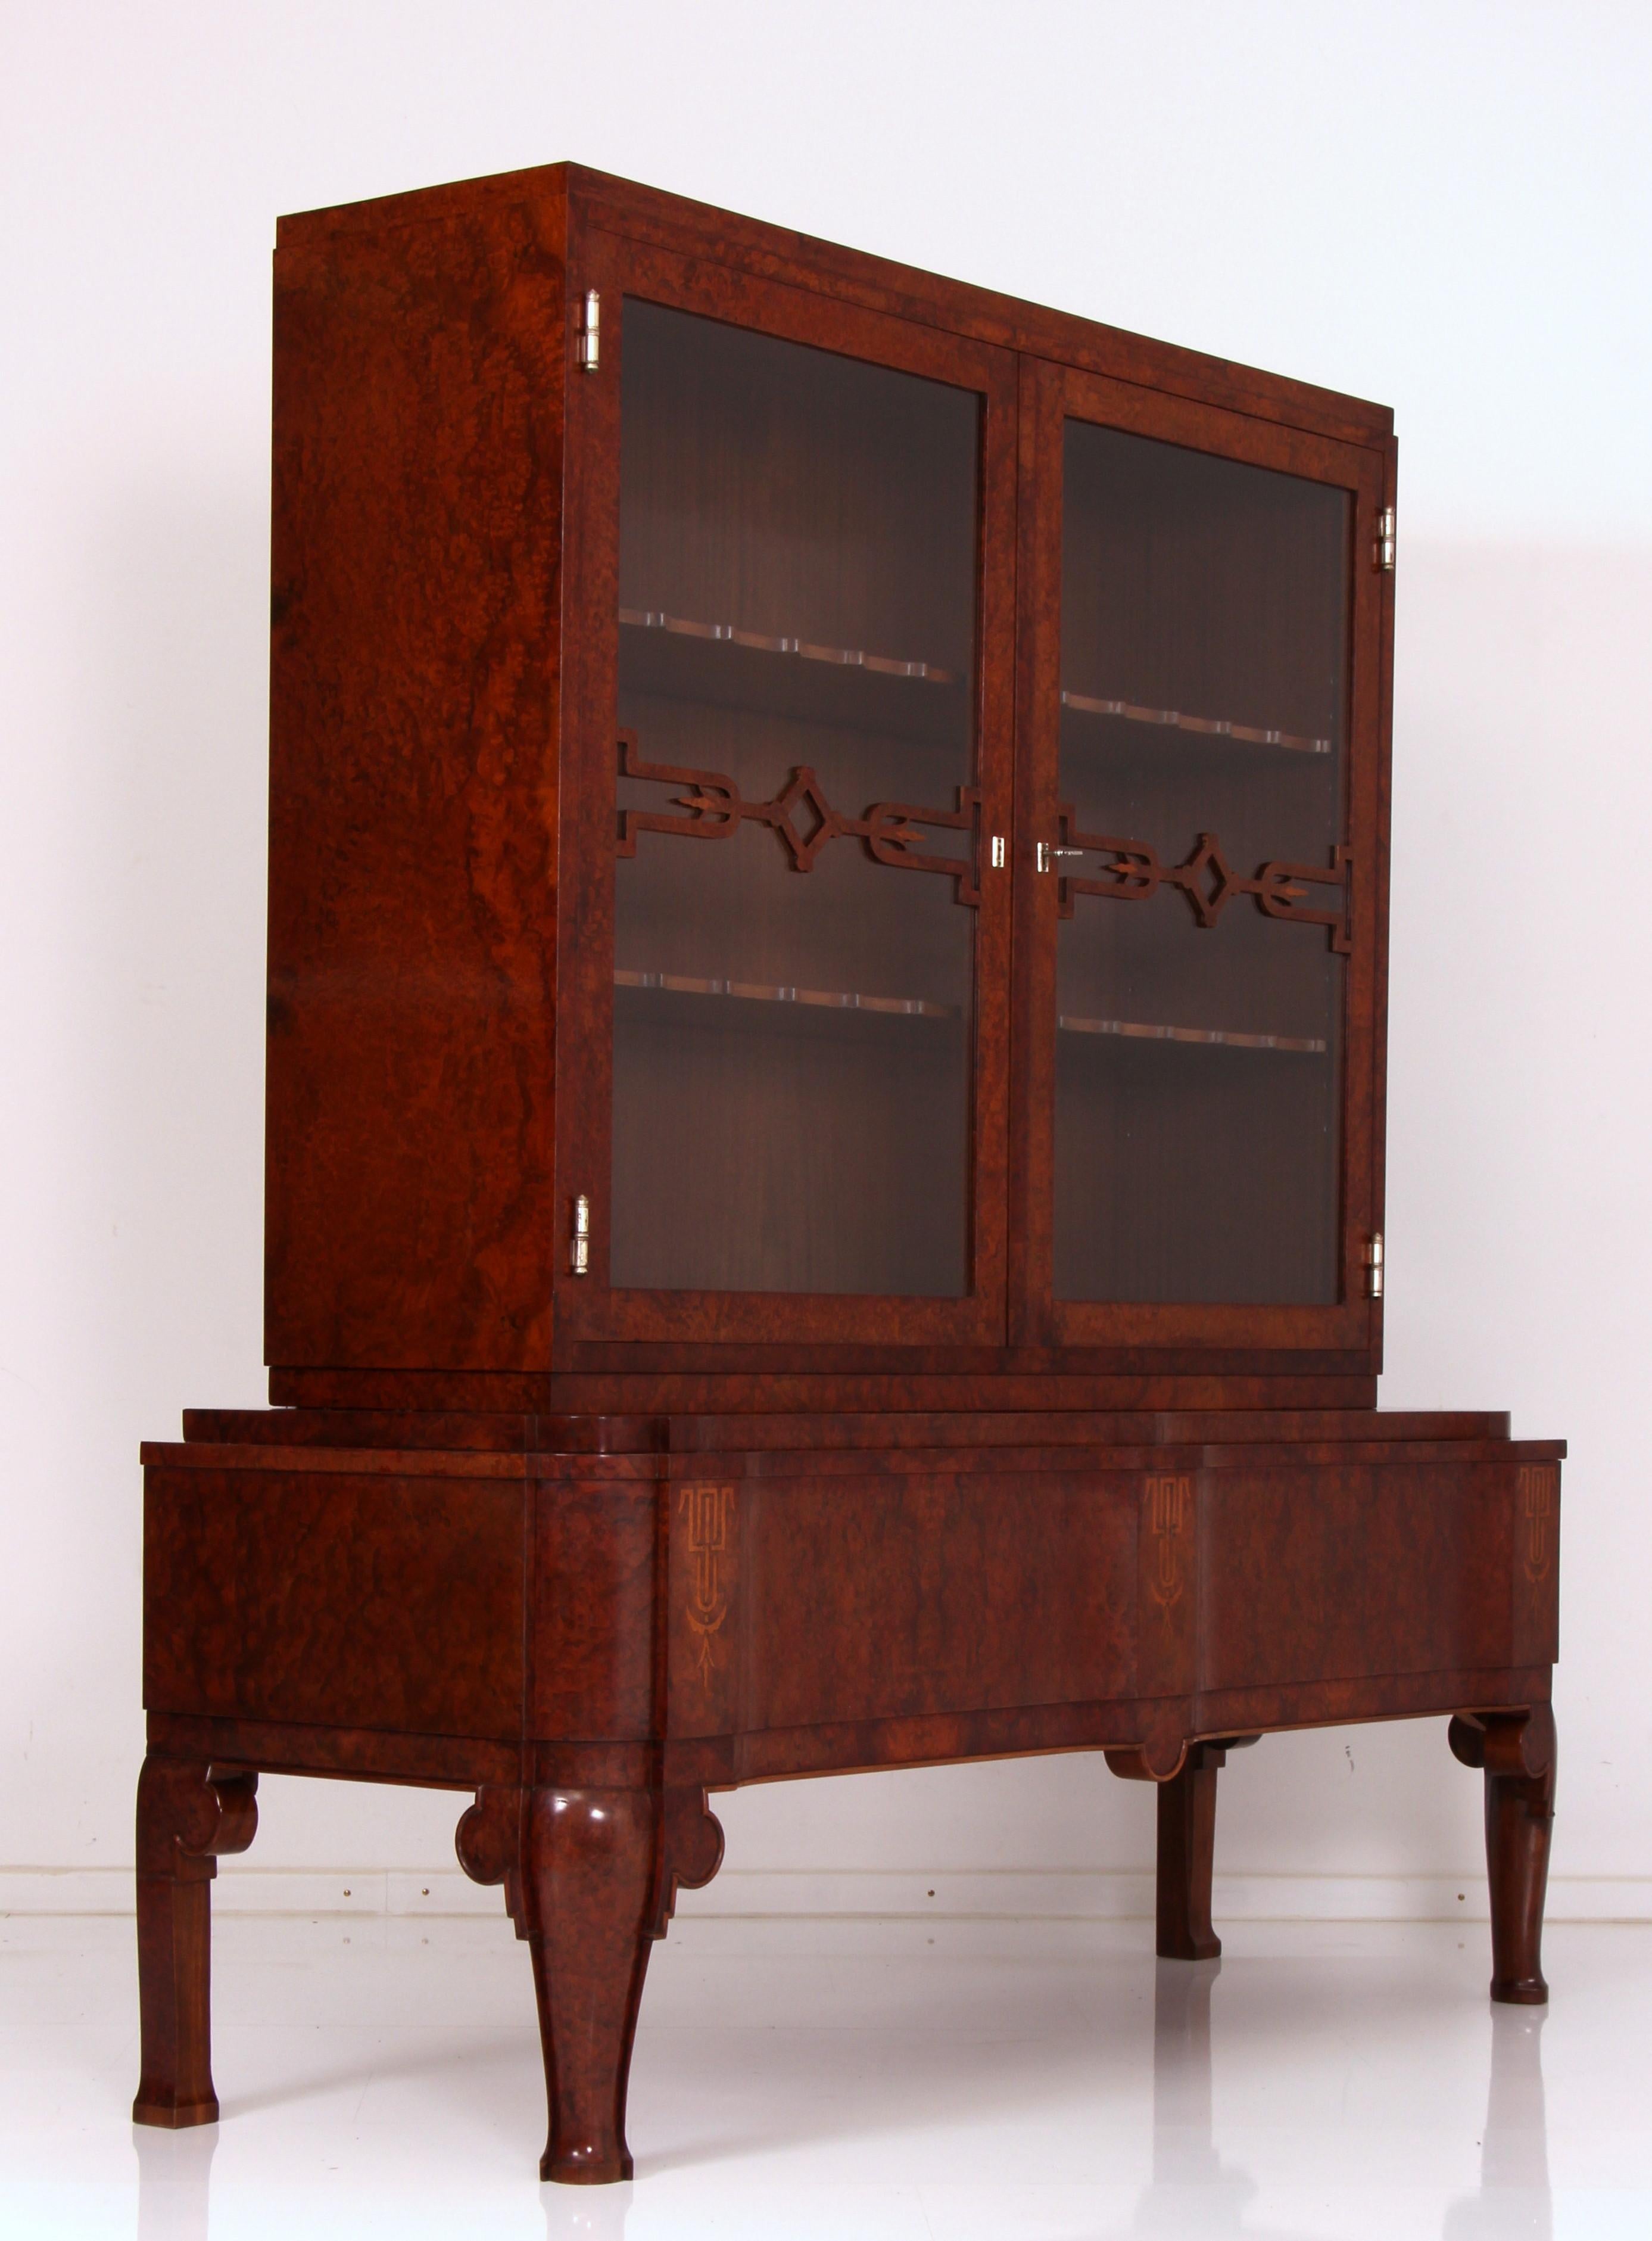 A bespoke diplay cabinet made by one of Munich´s most traditional cabinet makers Heinrich Pössenbacher in the early 1900 years (between 1908 and 1918)
The piece of furniture which is in incredibly good condition has been produced for a family in